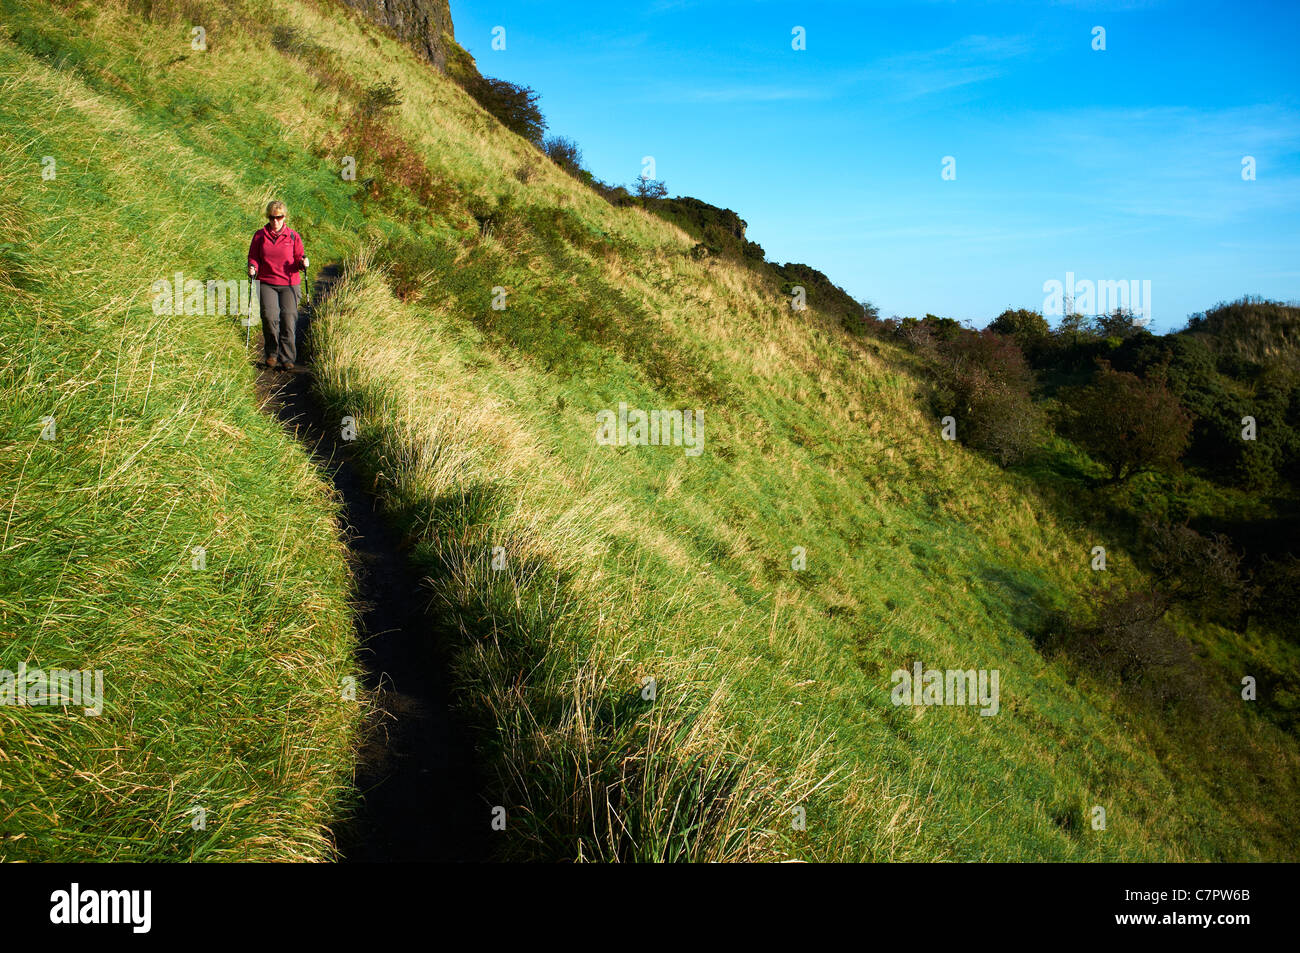 Woman Hill walker on Cave Hill walking on path using poles, Cave Hill country Park Stock Photo